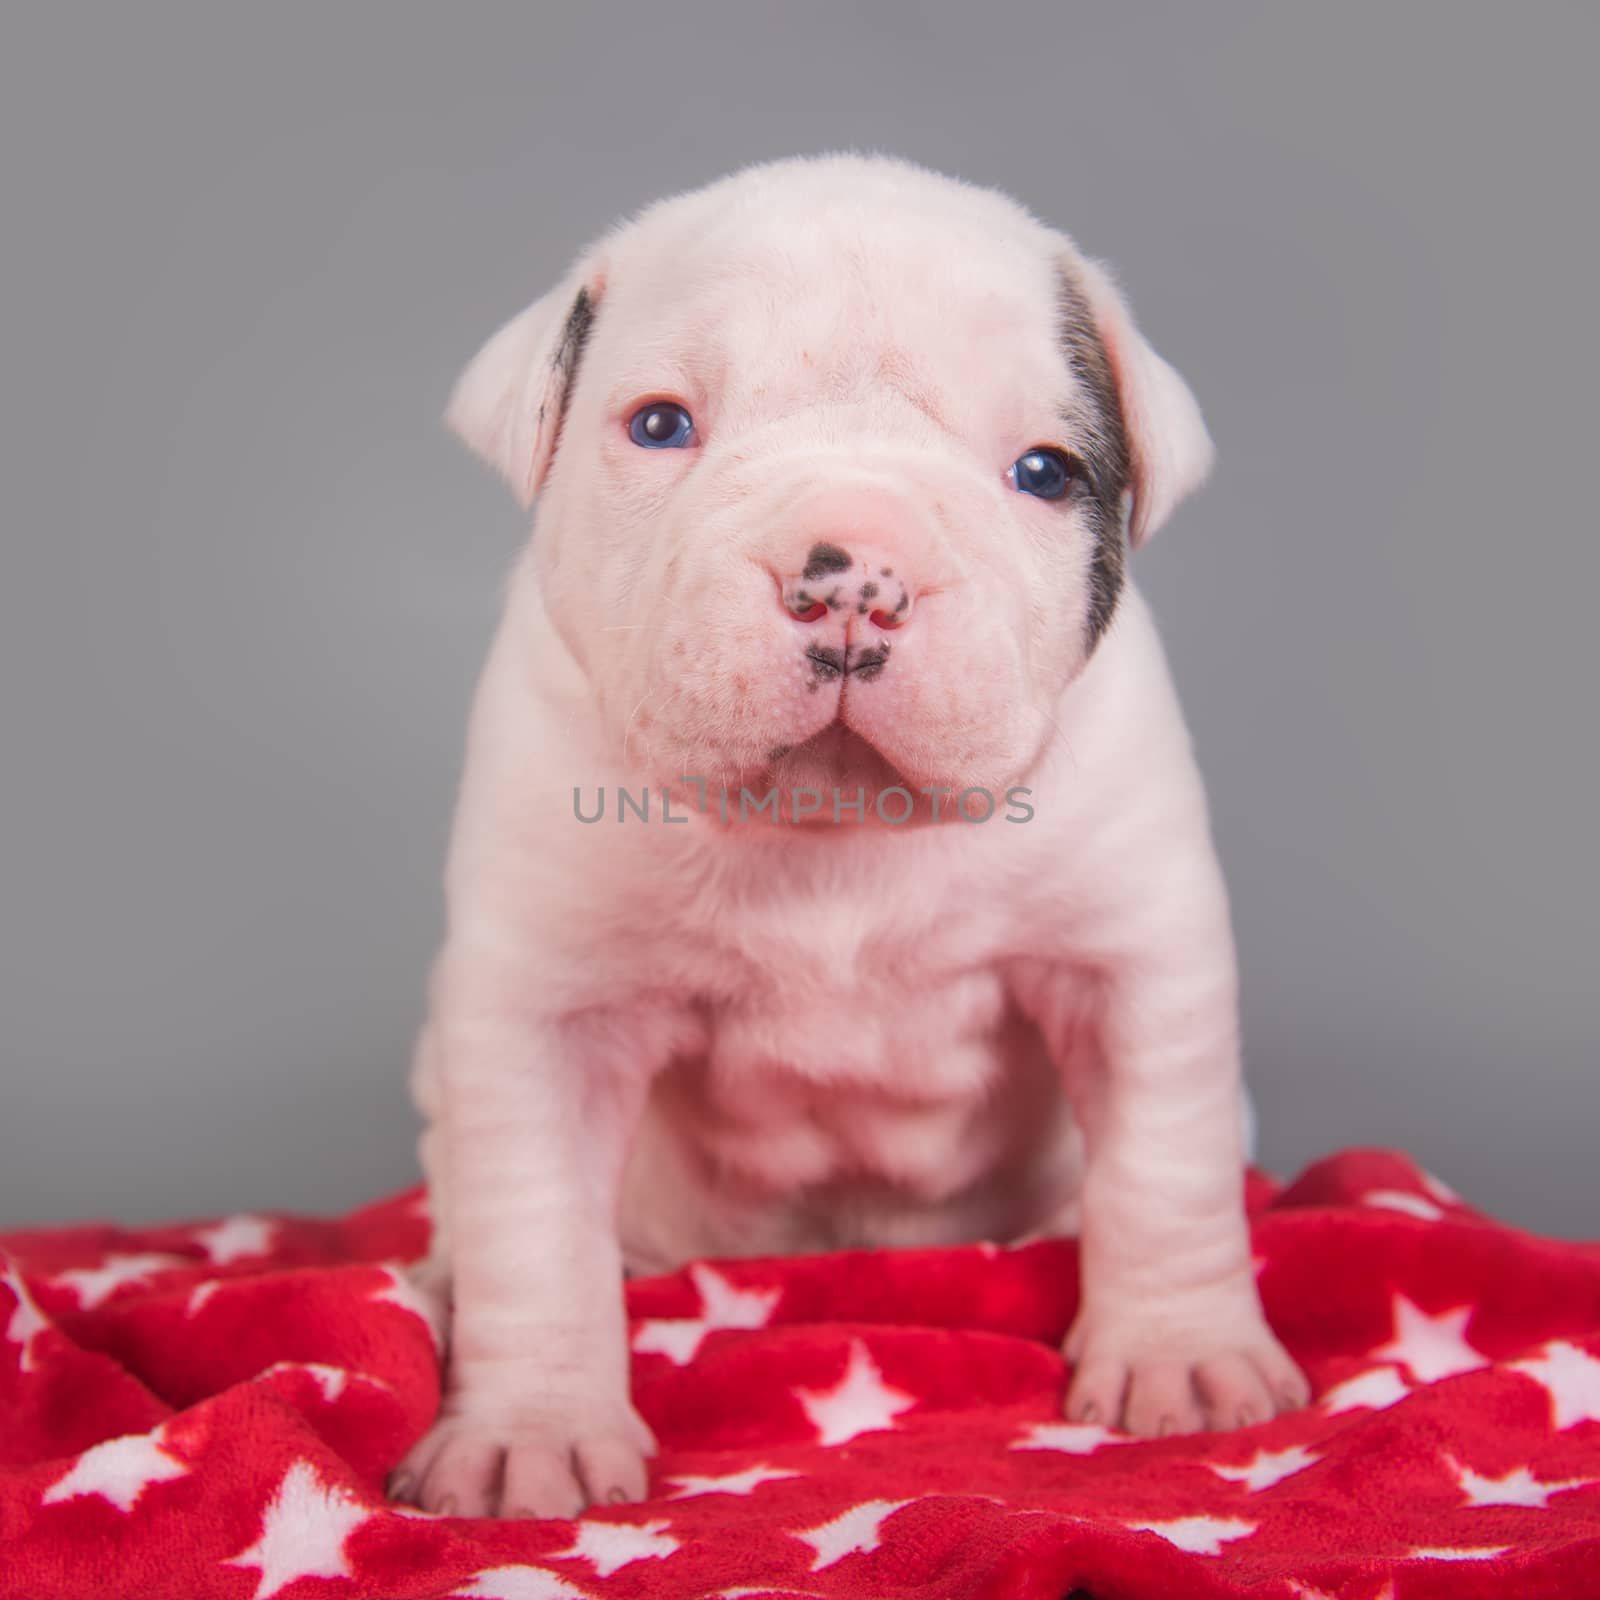 American Bulldog puppy dog on gray red background by infinityyy